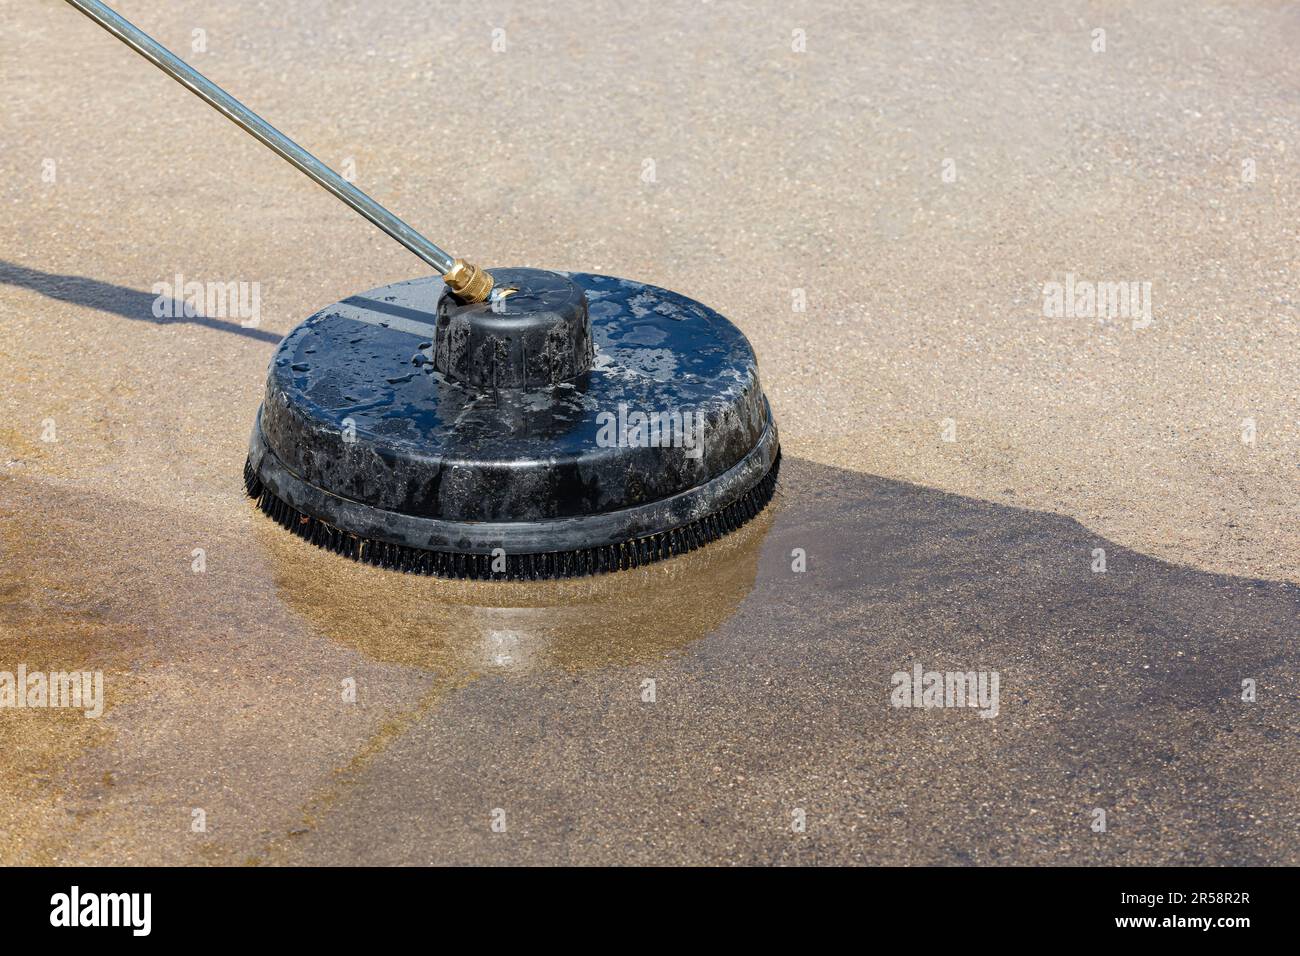 Pressure washing and cleaning dirty concrete driveway. Home cleaning, maintenance and household chores concept Stock Photo